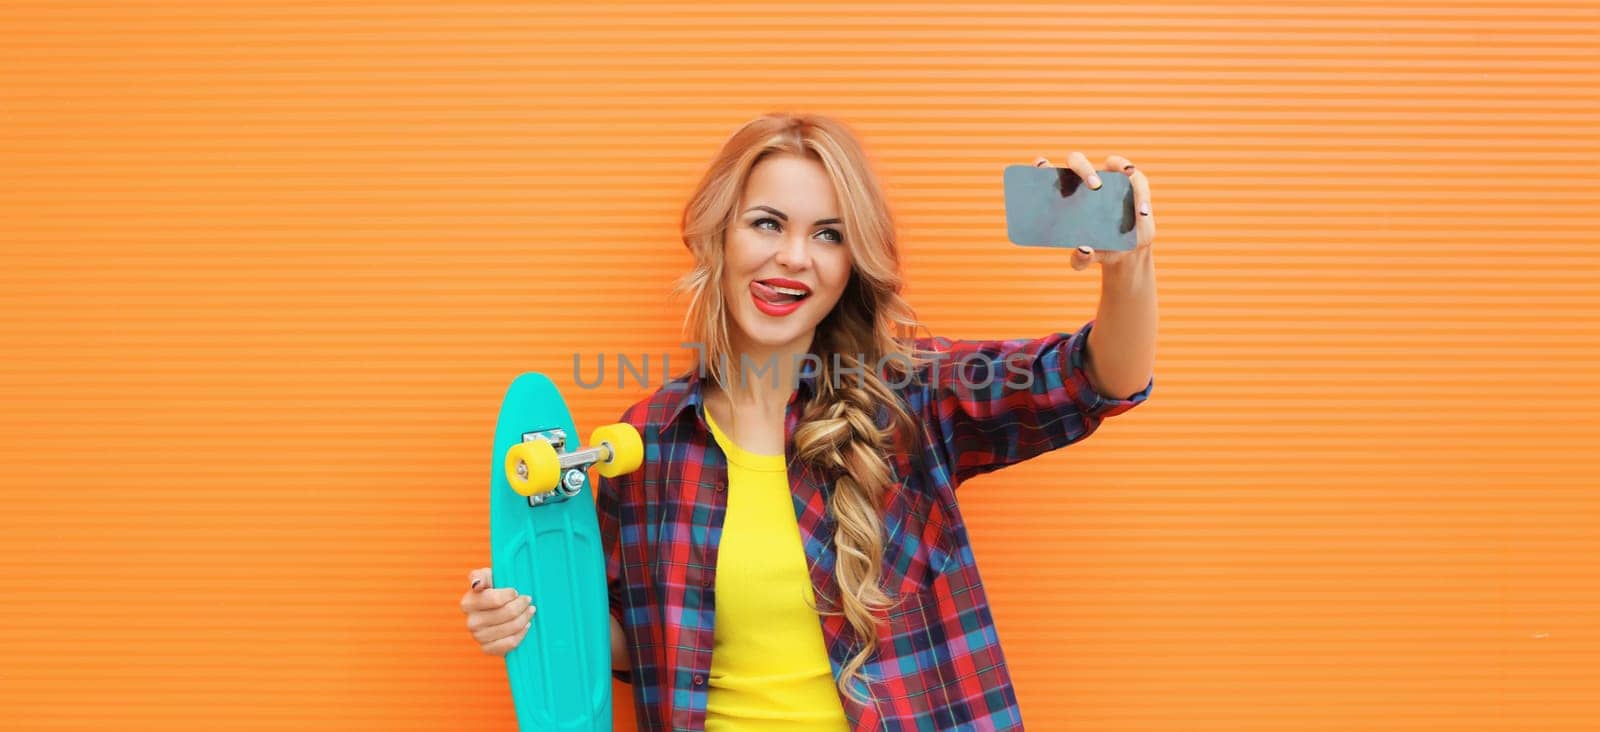 Summer portrait of happy smiling blonde young woman taking selfie with smartphone and skateboard on colorful orange background